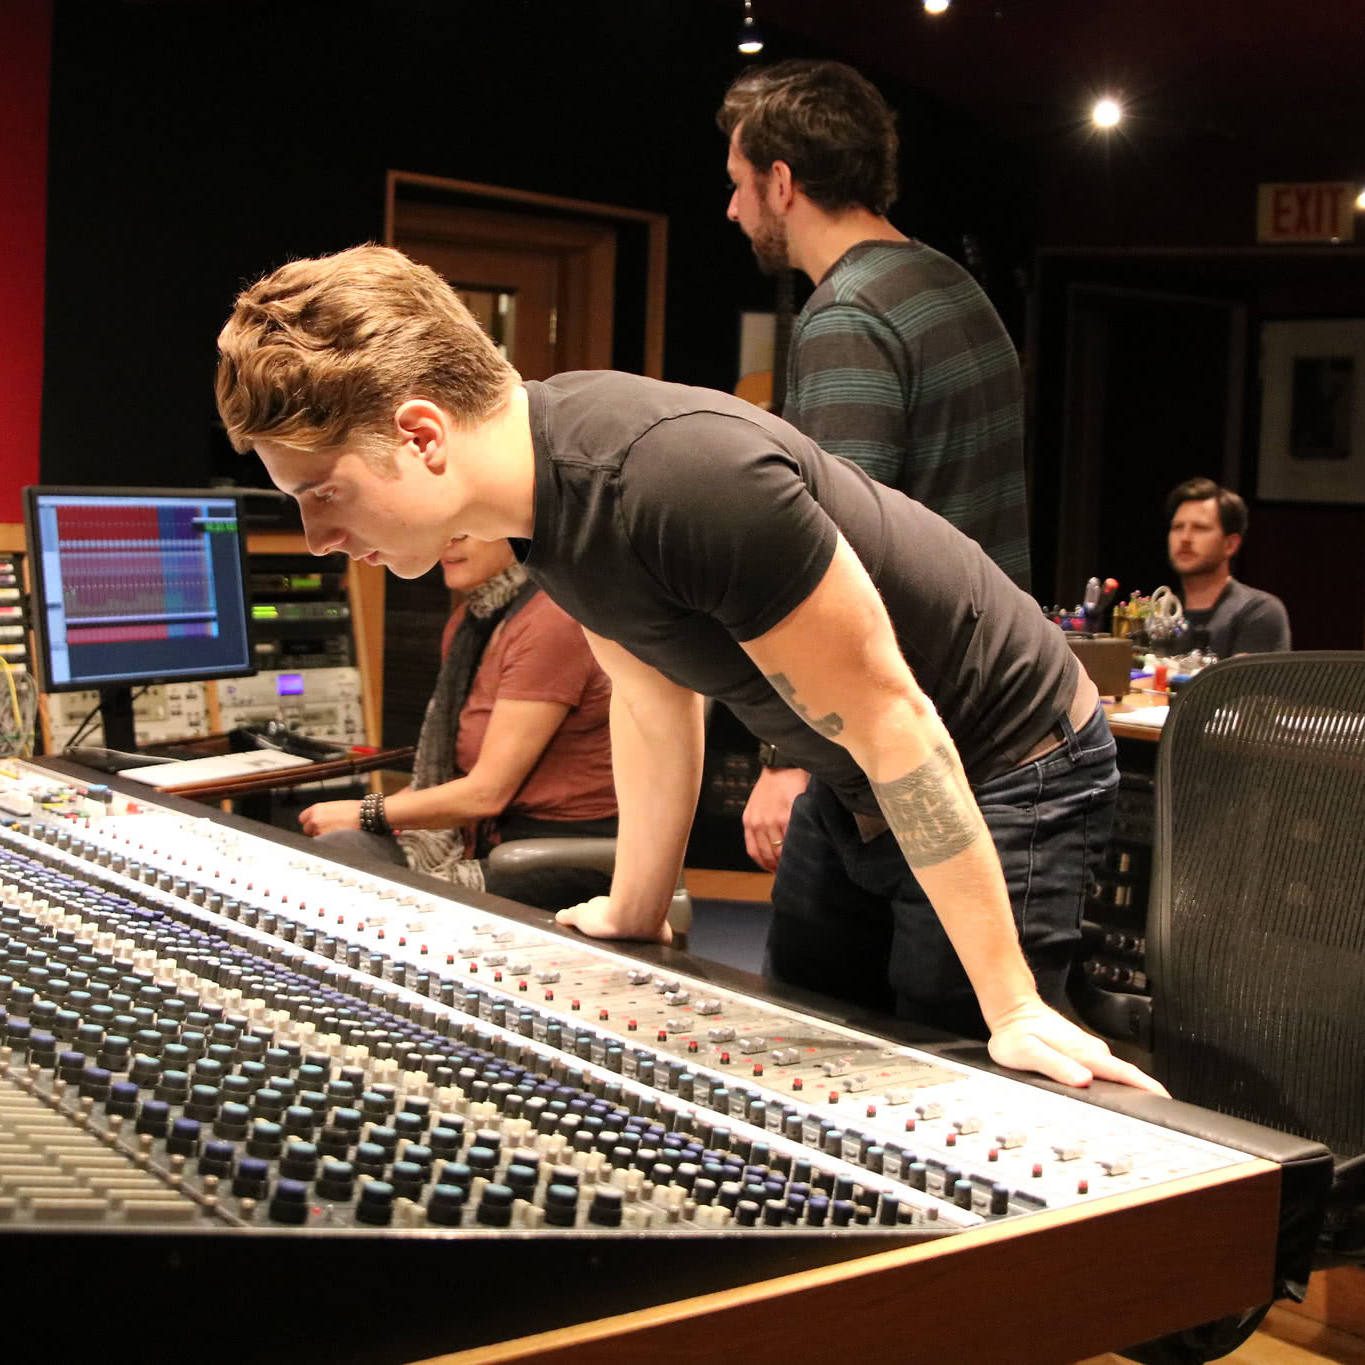 Student working at the Neve 8078 console in Studio A